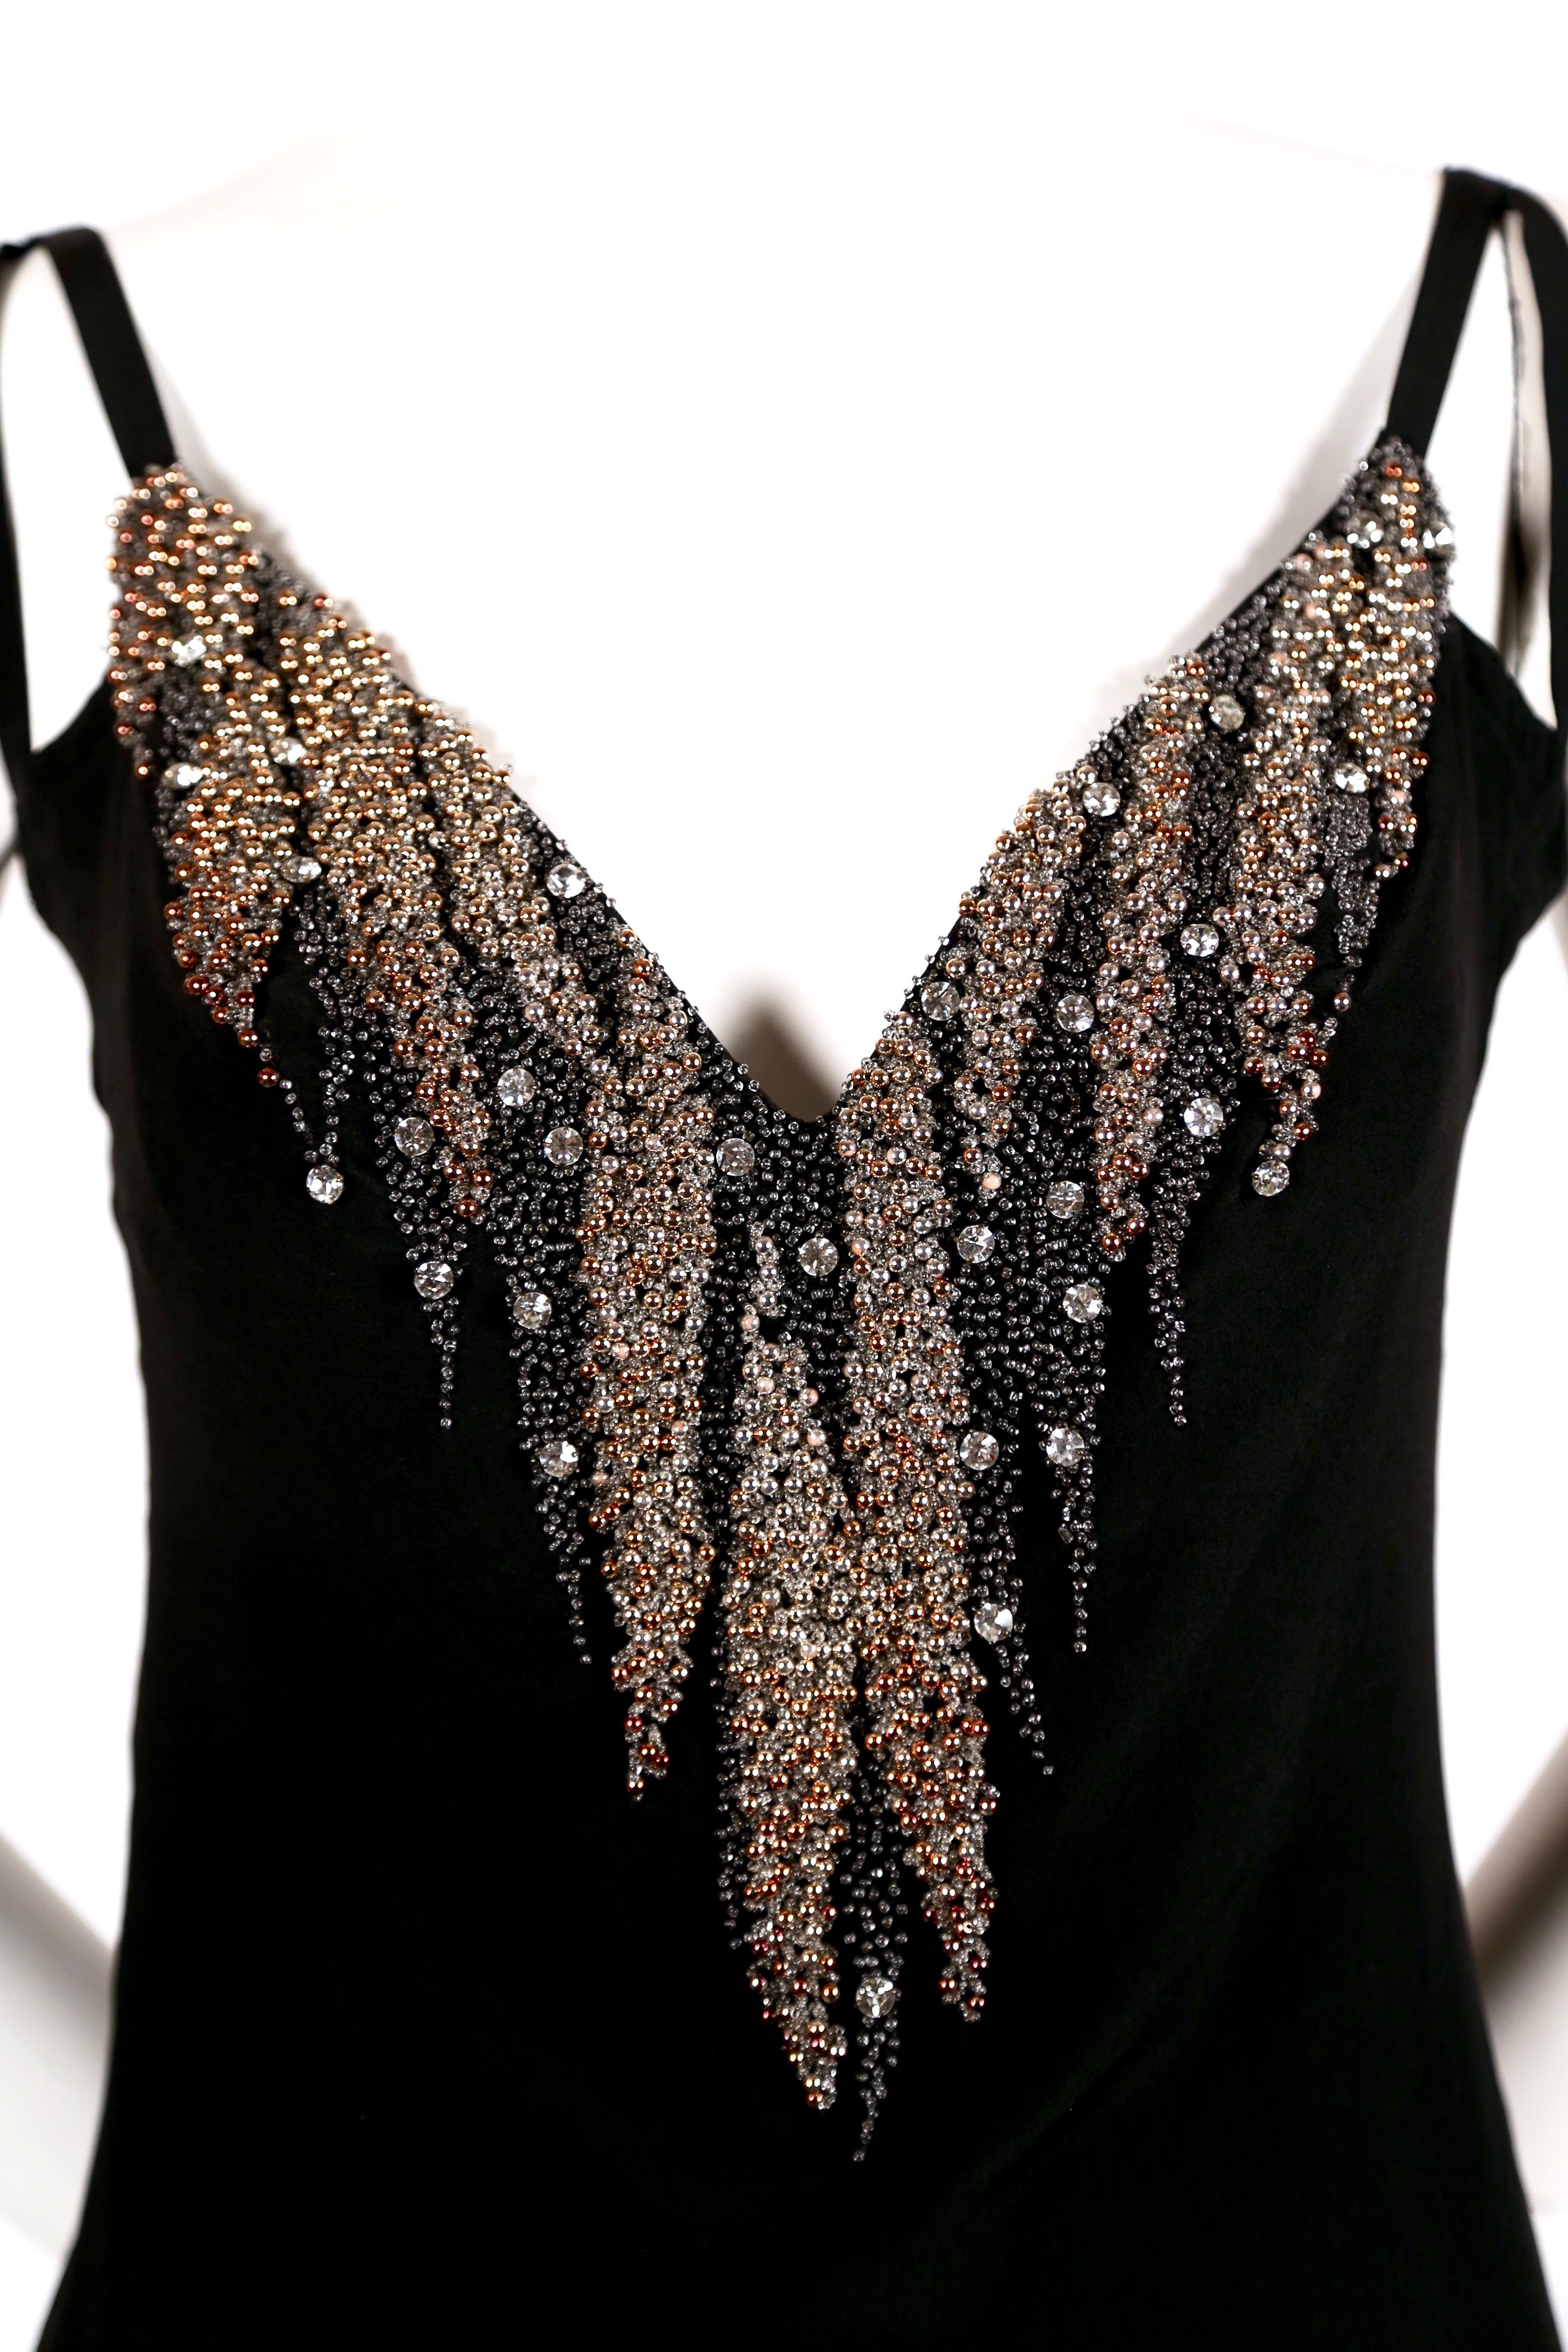 Intricately beaded black silk dress designed by Karl Lagerfeld for Chloe dating to the 1970's. Dress fits a size 4 or 6. Approximate measurements: bust 34